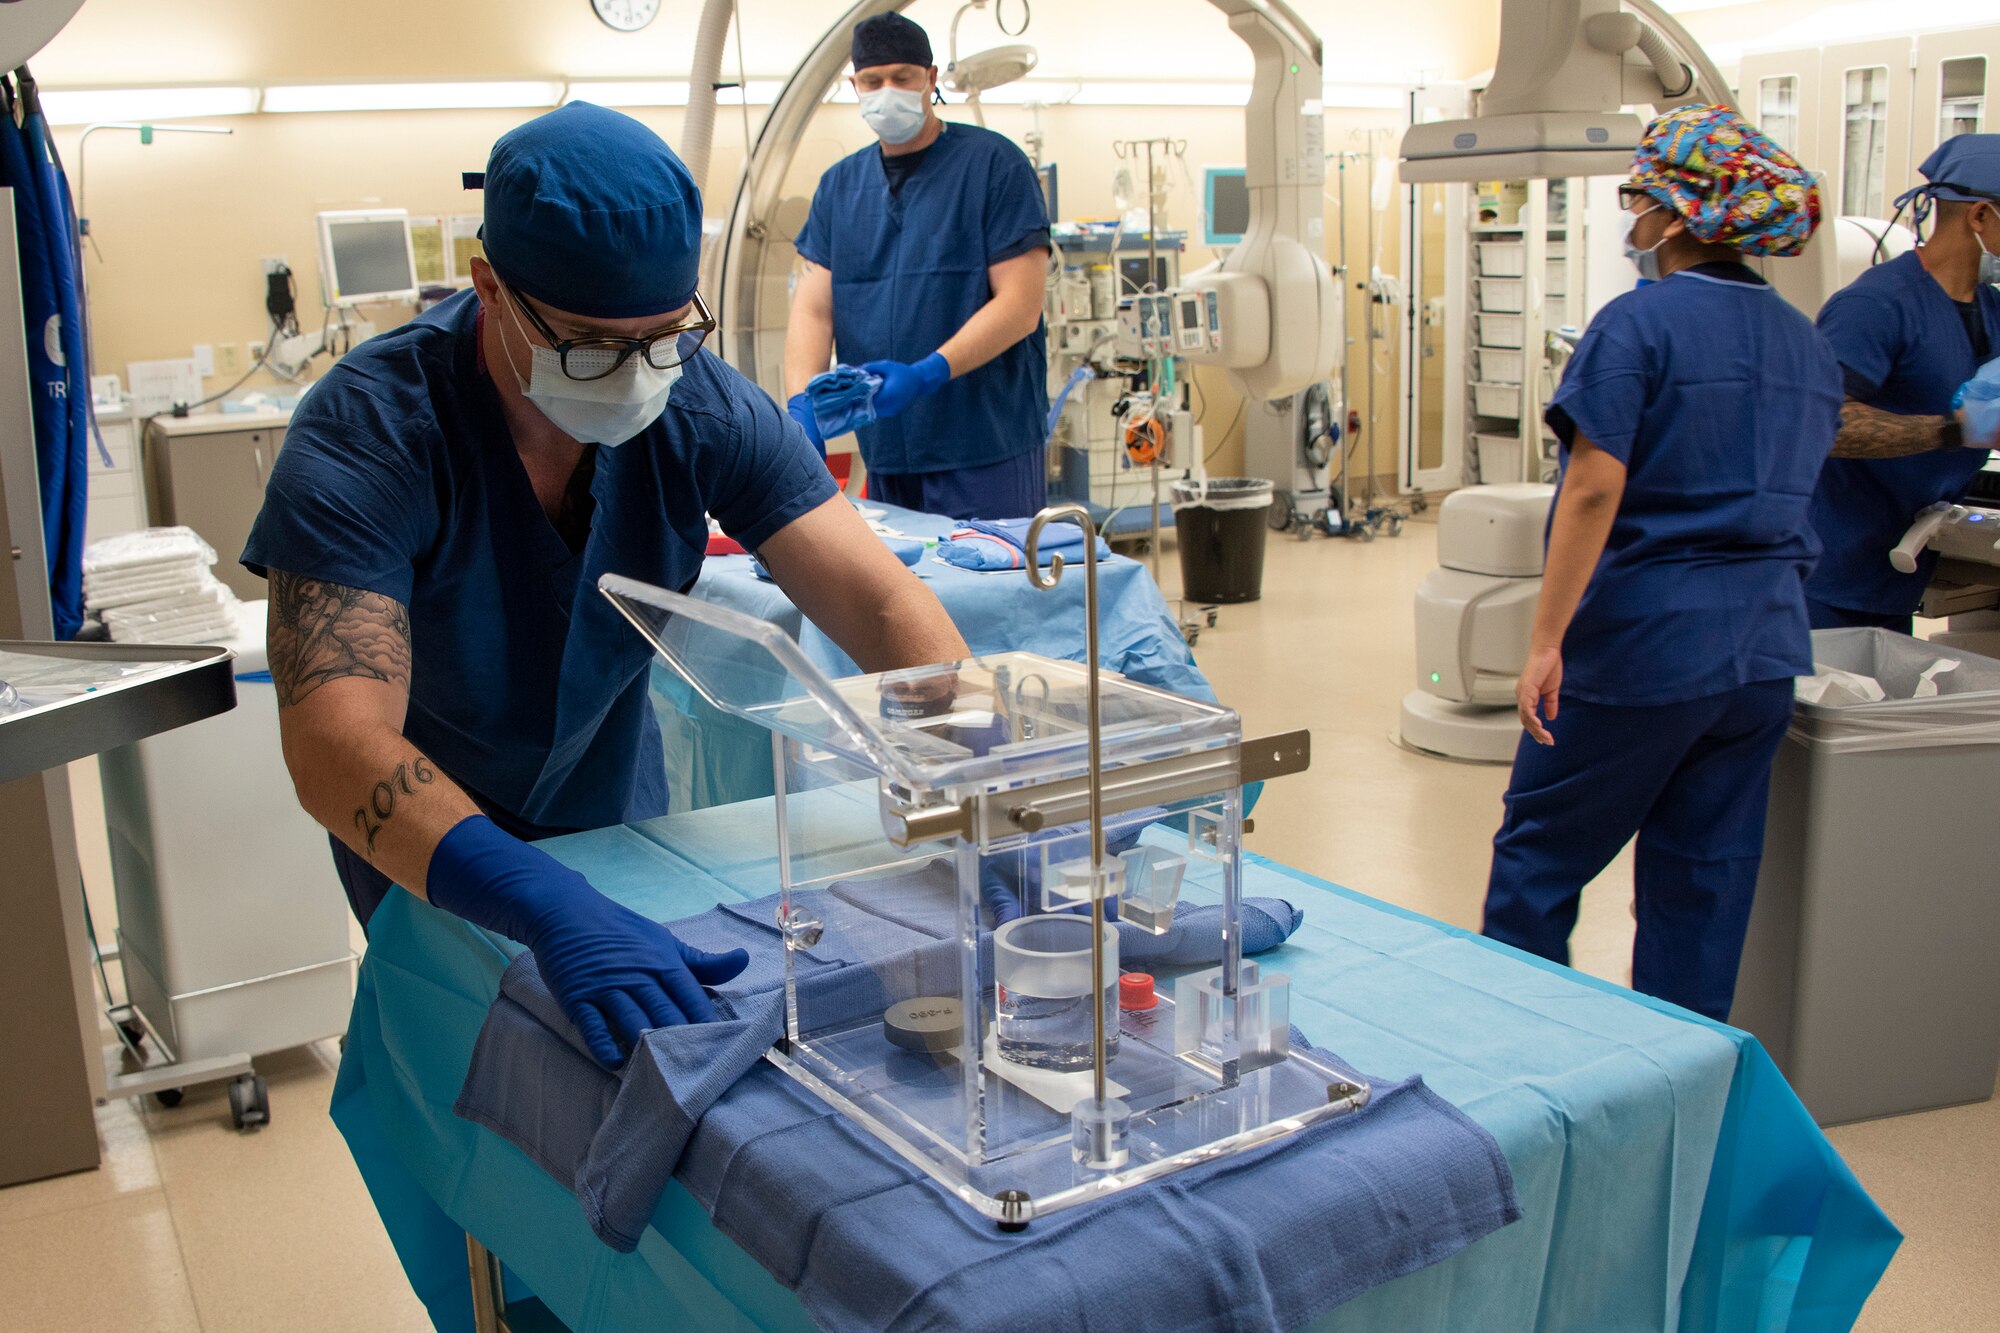 U.S. Air Force Senior Airman Justin Ritzel, 60th Diagnostics and Therapeutics Squadron, prepares a tray of specialized medical equipment ahead of an Yttrium-90 radioembolization procedure for a patient with liver cancer, Sept. 7, 2018, Travis Air Force Base, Calif. The Y-90 radioembolization is an advanced and minimally invasive method utilized for this disease by delivering millions of tiny radioactive beads inside the blood vessels that feed a tumor. The high dose of targeted radiation prospectively kills the tumor while sparing normal tissue. This was the first time the treatment was performed at David Grant U.S. Air Force Medical Center. (U.S. Air Force photo illustration by Josh Mahler)